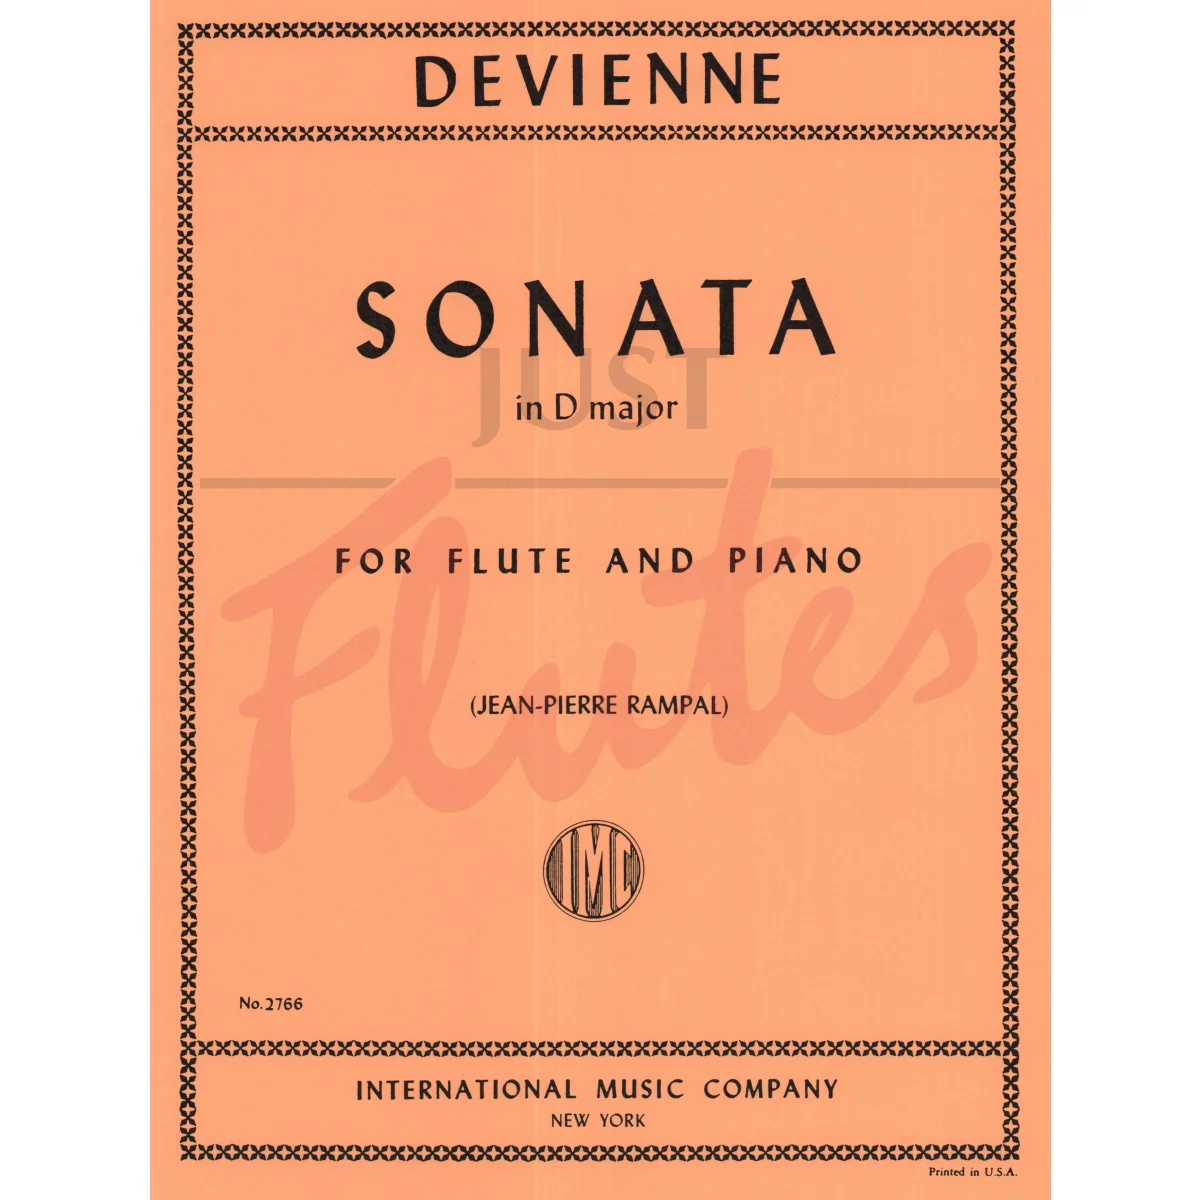 Sonata in D major for Flute and Piano